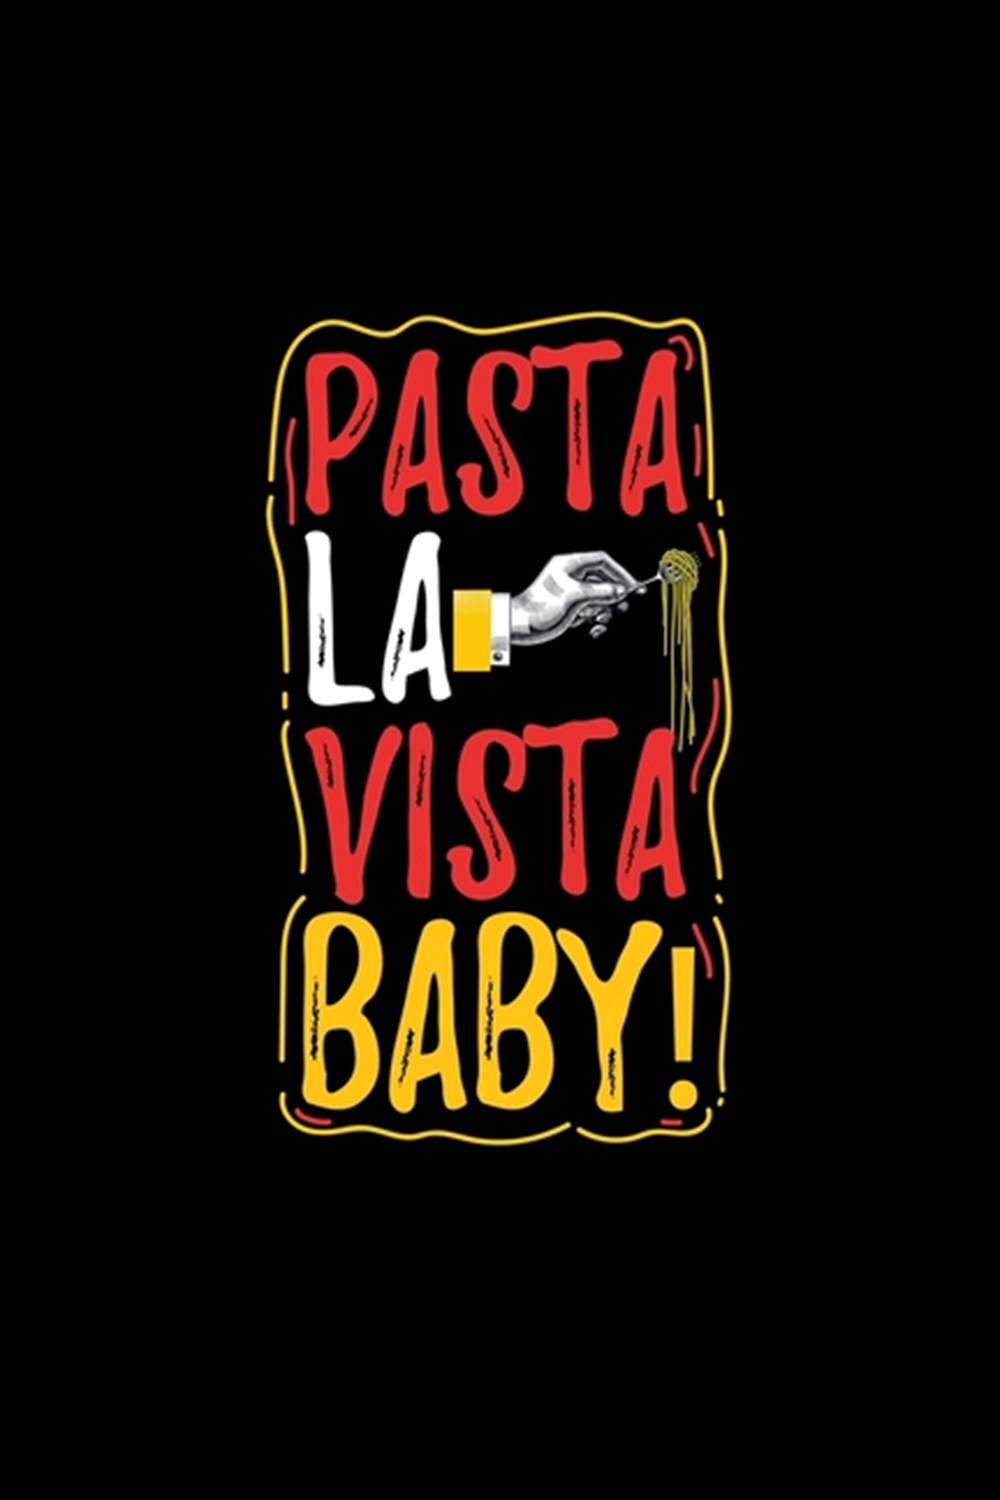 Pasta La Vista Baby! Blank Cookbook Journal to Write in Recipes and Notes to Create Your Own Family 